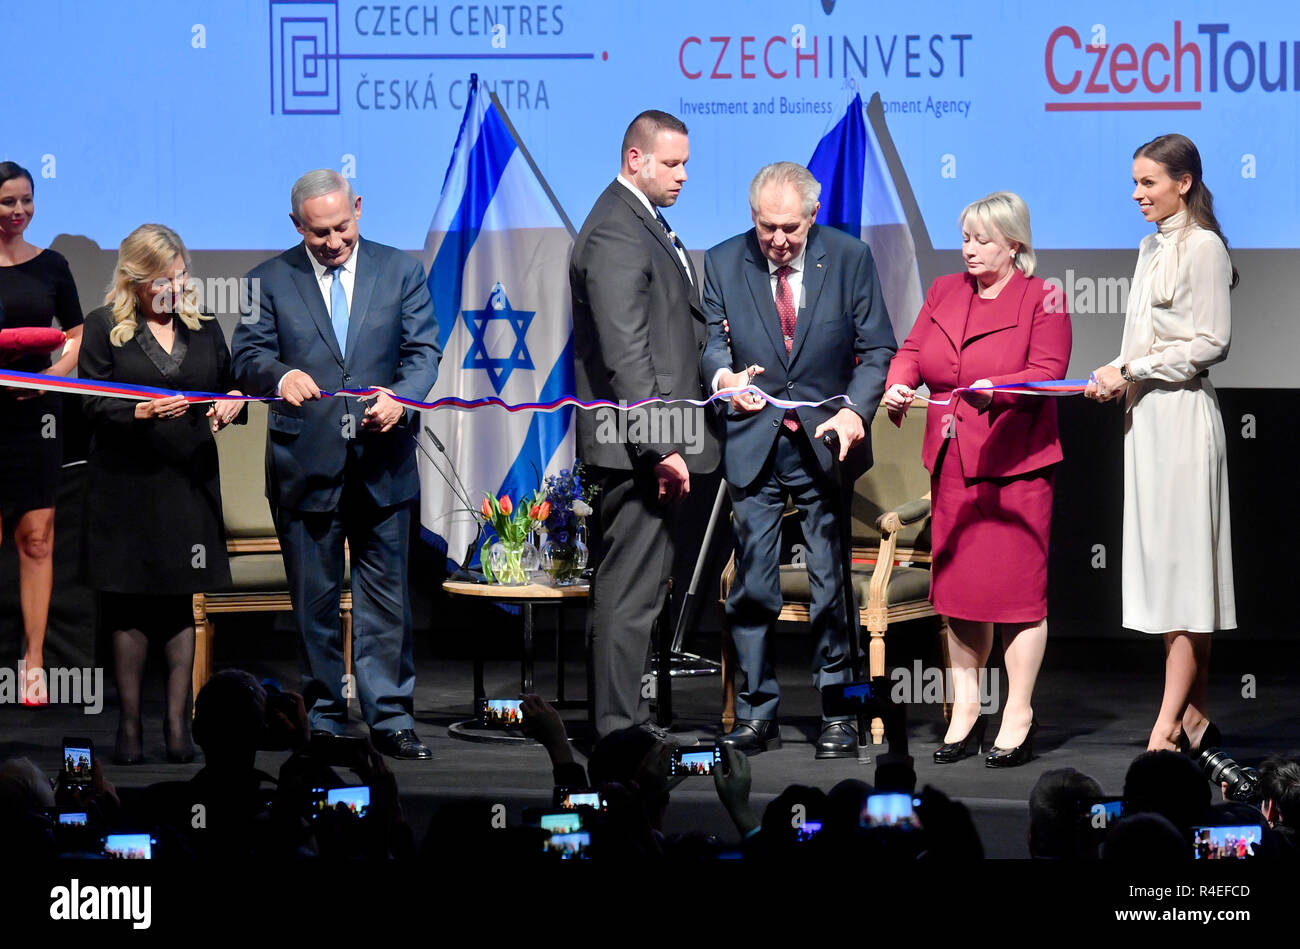 Israeli Prime Minister Benjamin Netanyahu and his wife Sara Netanyahu (left) and Czech President Milos Zeman and his wife Ivana Zemanova opened the Czech House in Jerusalem, Israel, today on November 27, 2018. The Czech House, a joint office of state agencies CzechTrade, CzechInvest, CzechTourism and Czech Centers, is situated in the building of Cinematheque near the Old Town in Jerusalem. Zeman said he believes his next visit will be on the occasion of opening of the Czech embassy in Jerusalem. A man standing at centre is bodyguard supporting Czech President. (CTK Photo/Vit Simanek) Stock Photo